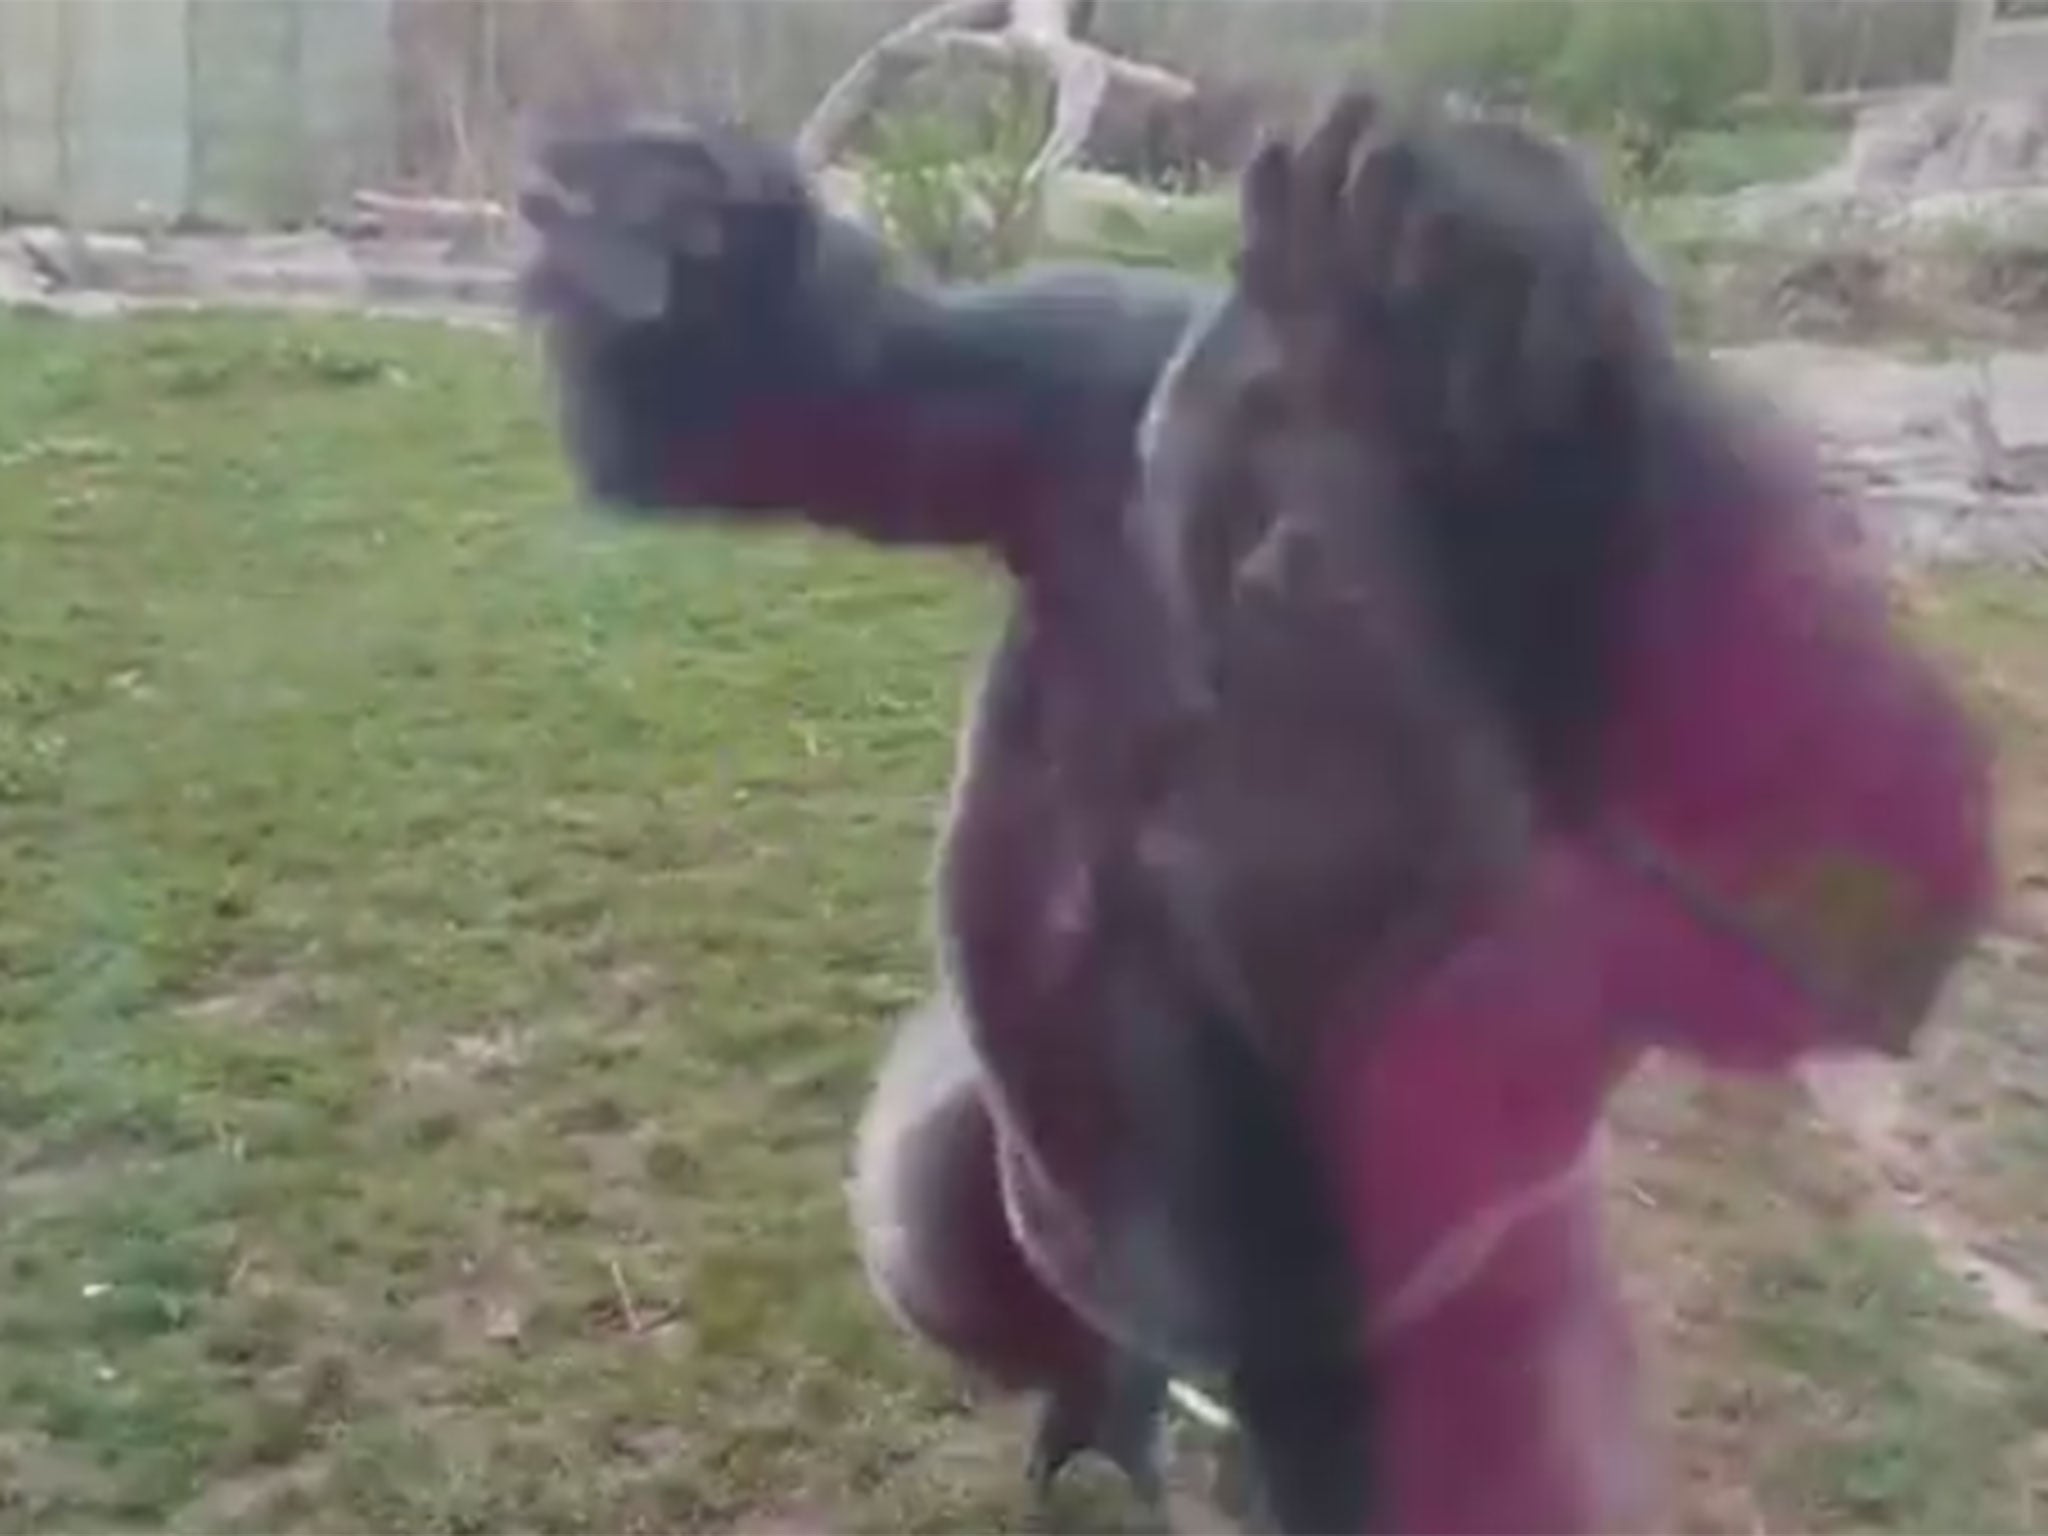 The Gorilla attacked the window at Henry Dorly Zoo in Omaha